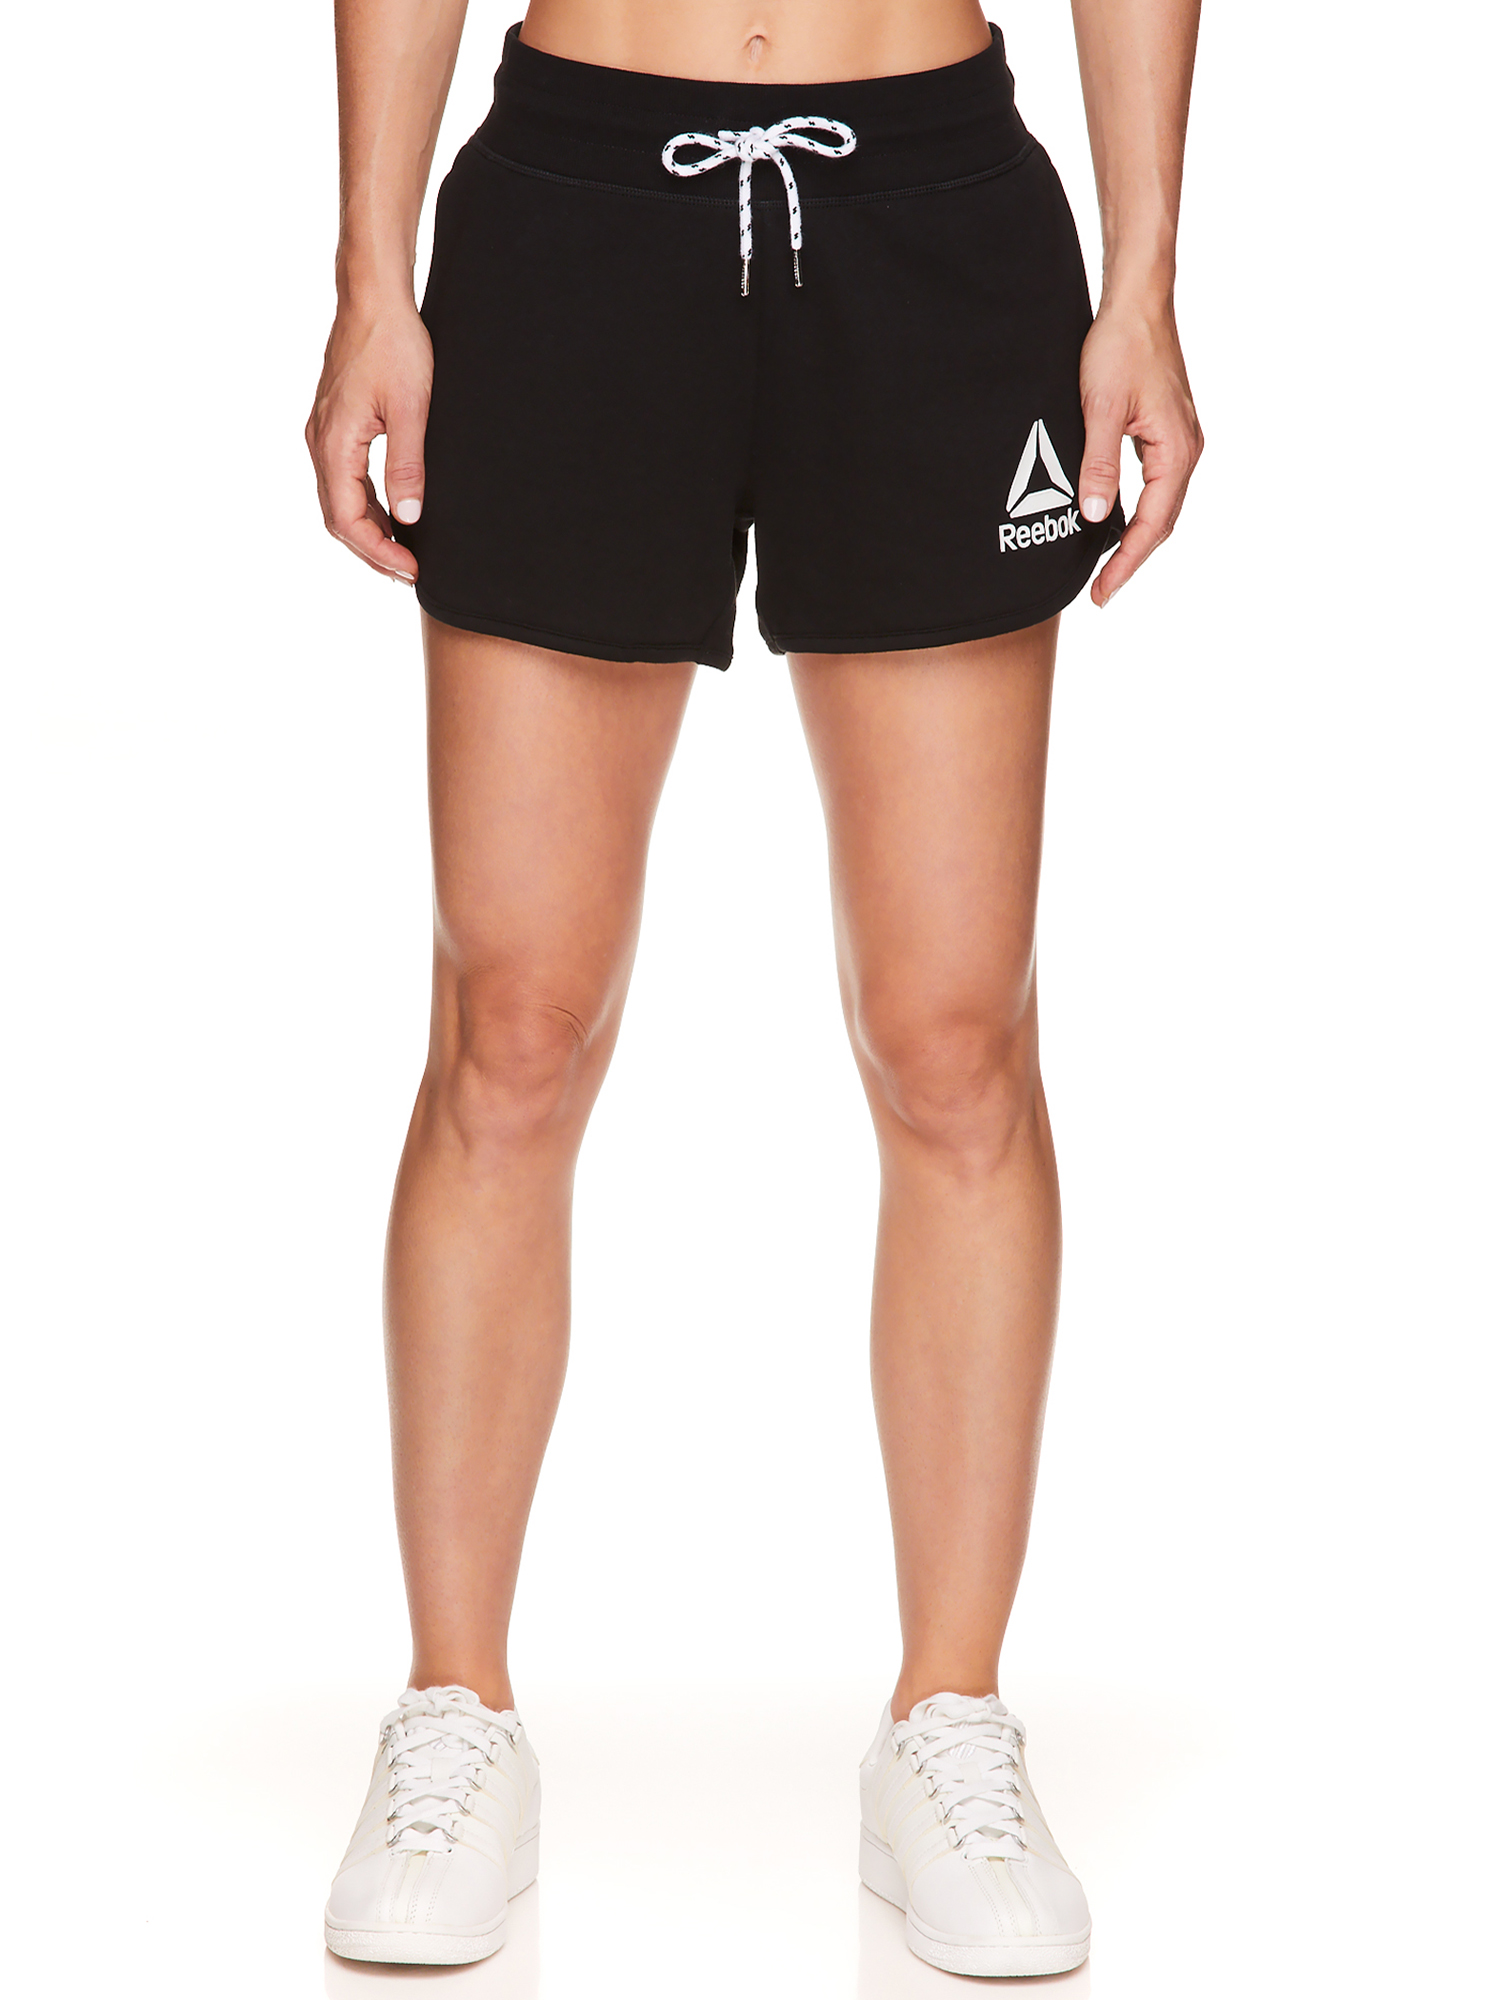 Reebok Womens Equity Graphic Athletic Shorts, 3.5" Inseam - image 1 of 4